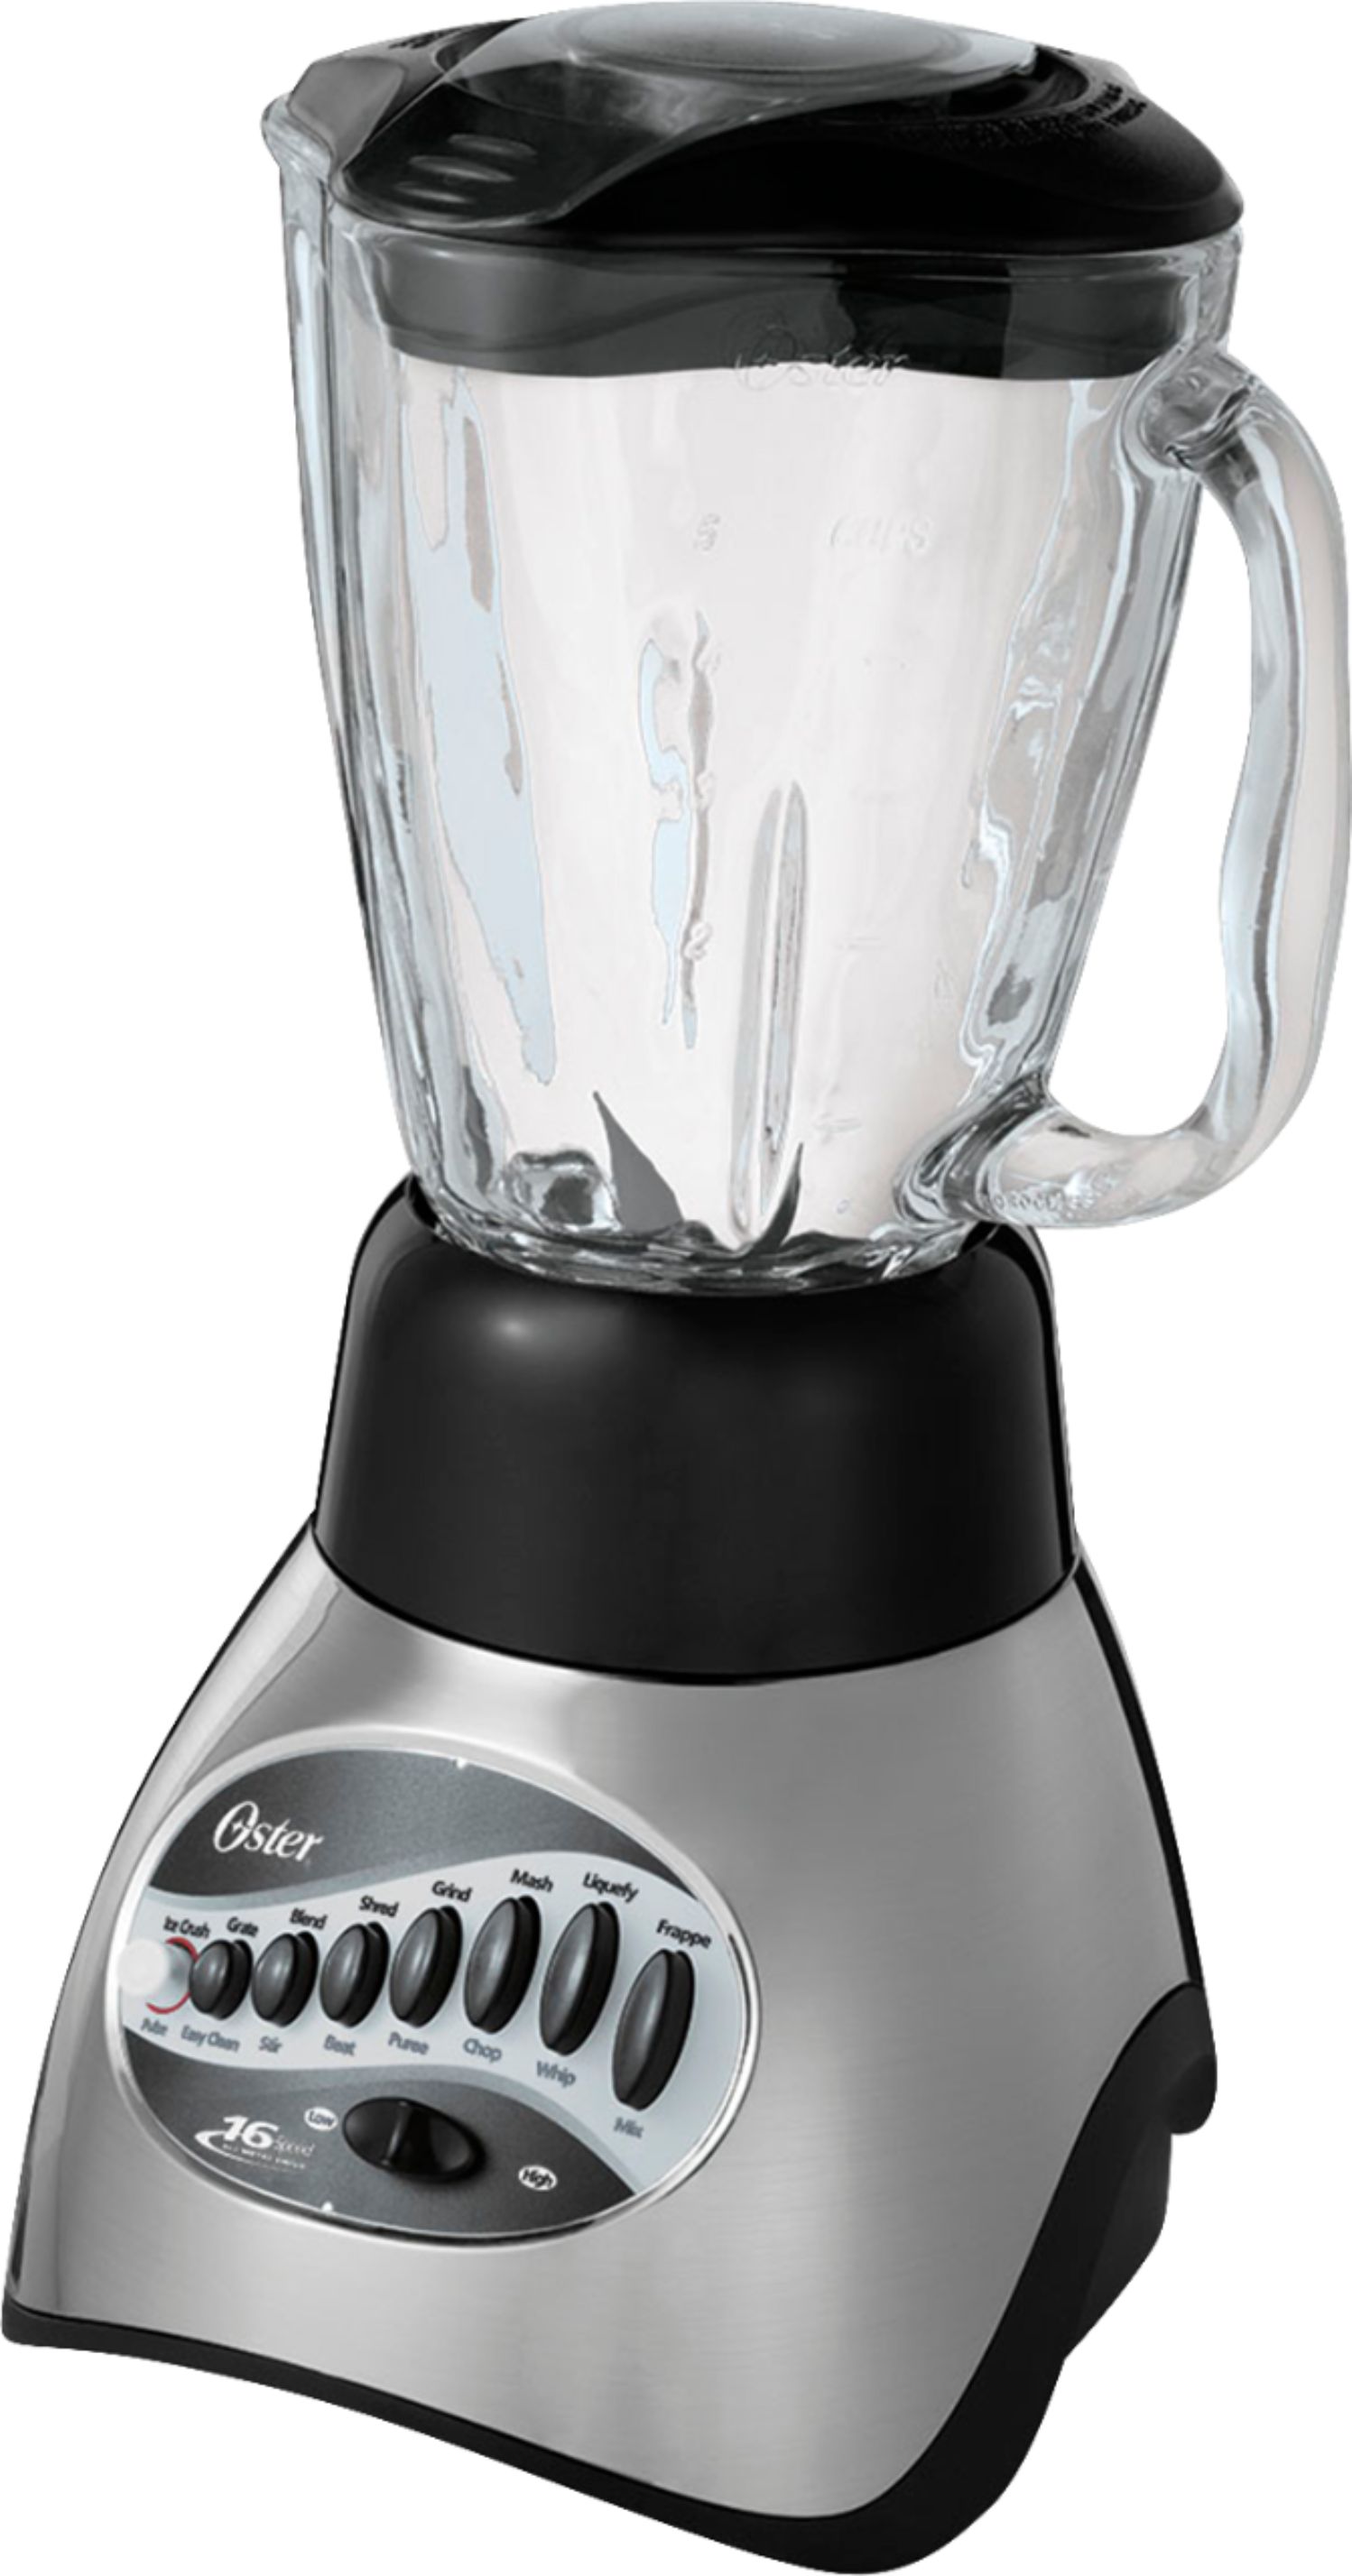 Angle View: Oster Precise Blend 200 16-Speed Blender 6-Cup Capacity, Gray 006812-001-NP0